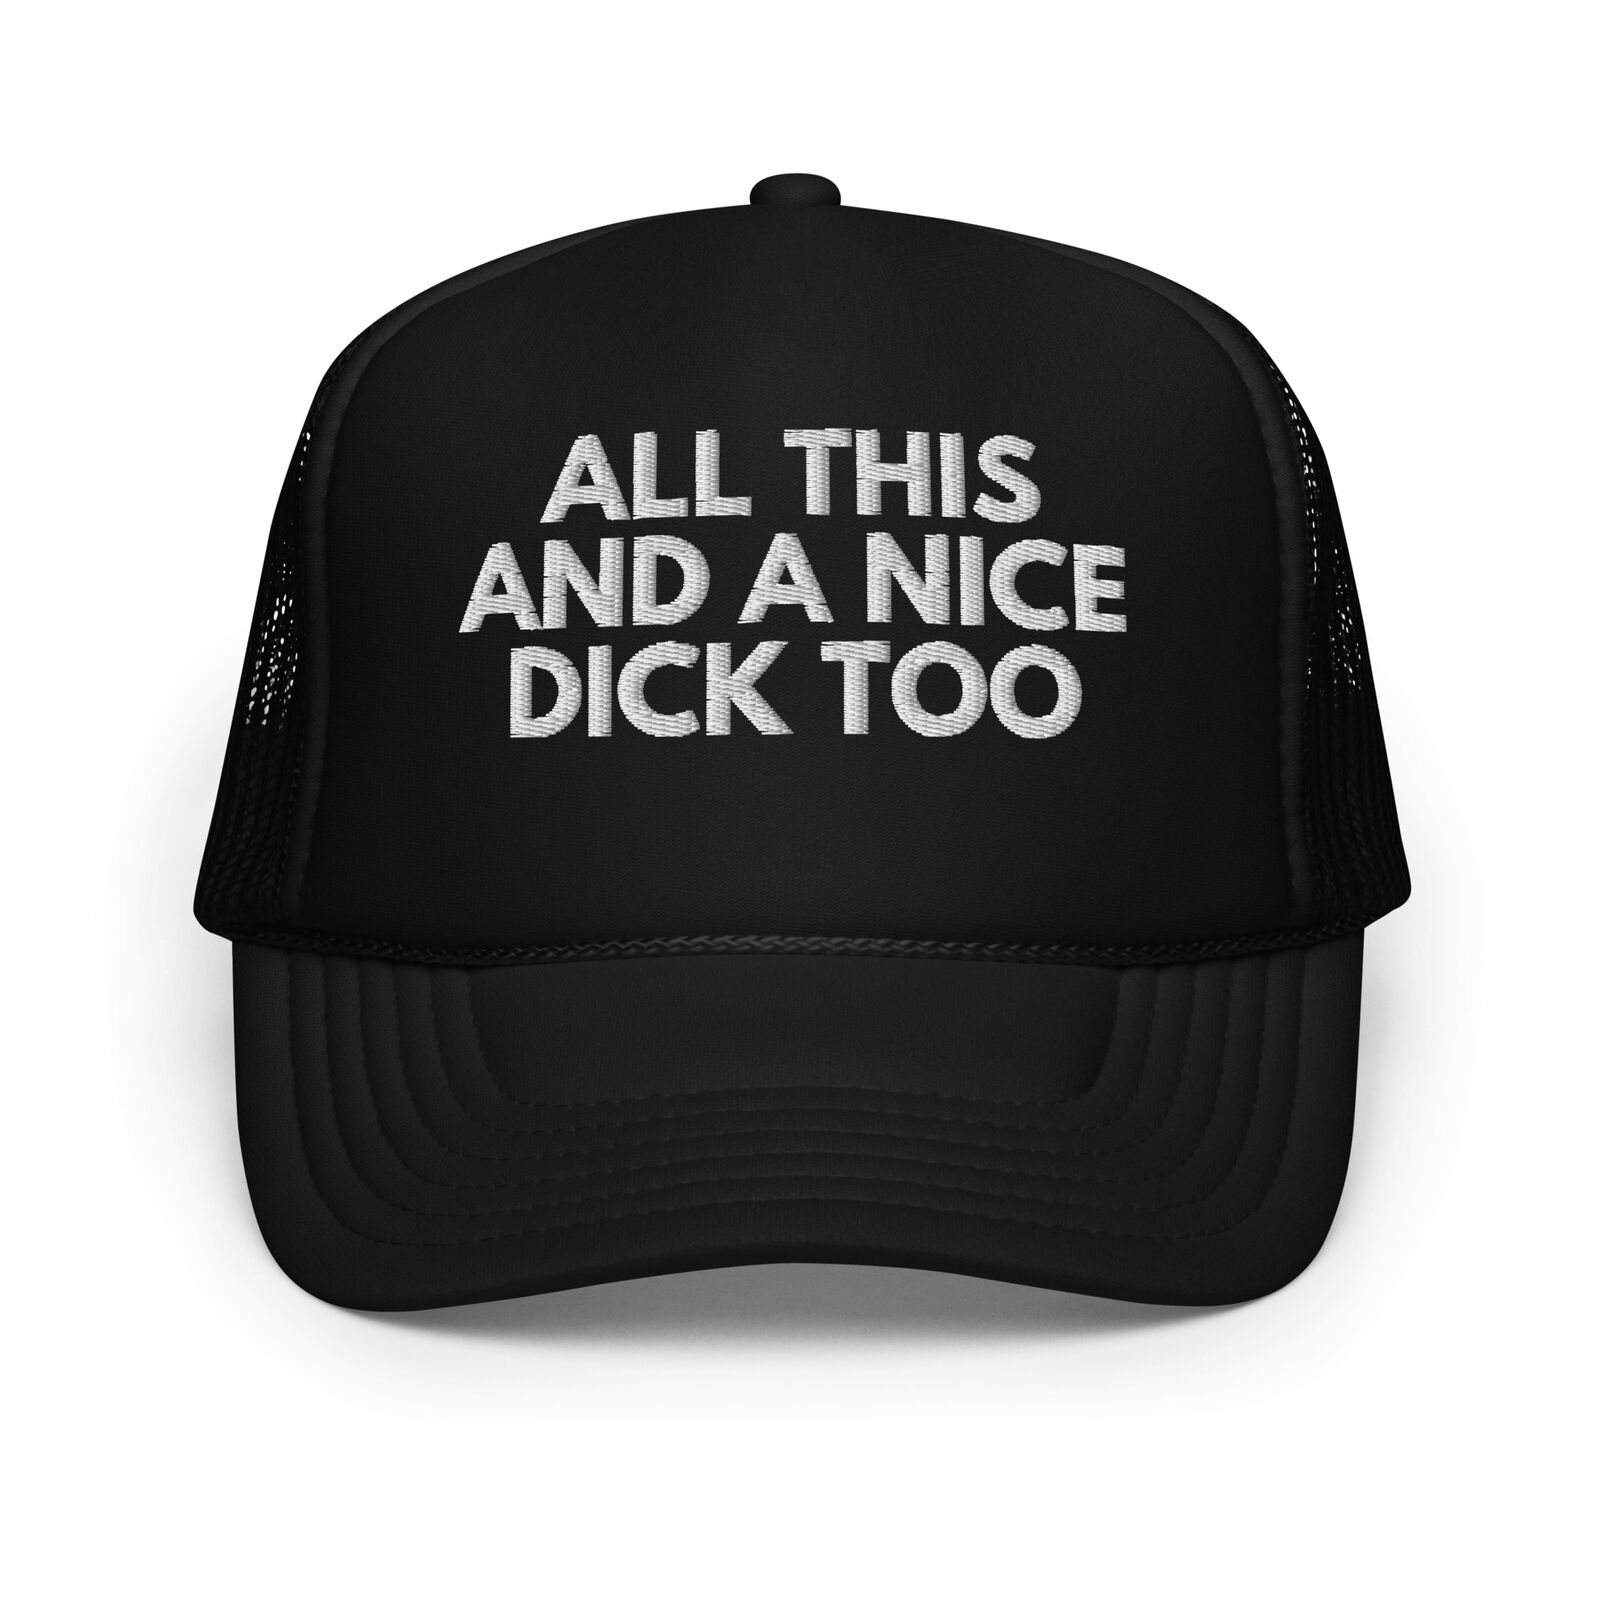 All This and a Nice Dick Too Funny Trucker Hat Snapback Adult Humor Baseball Cap